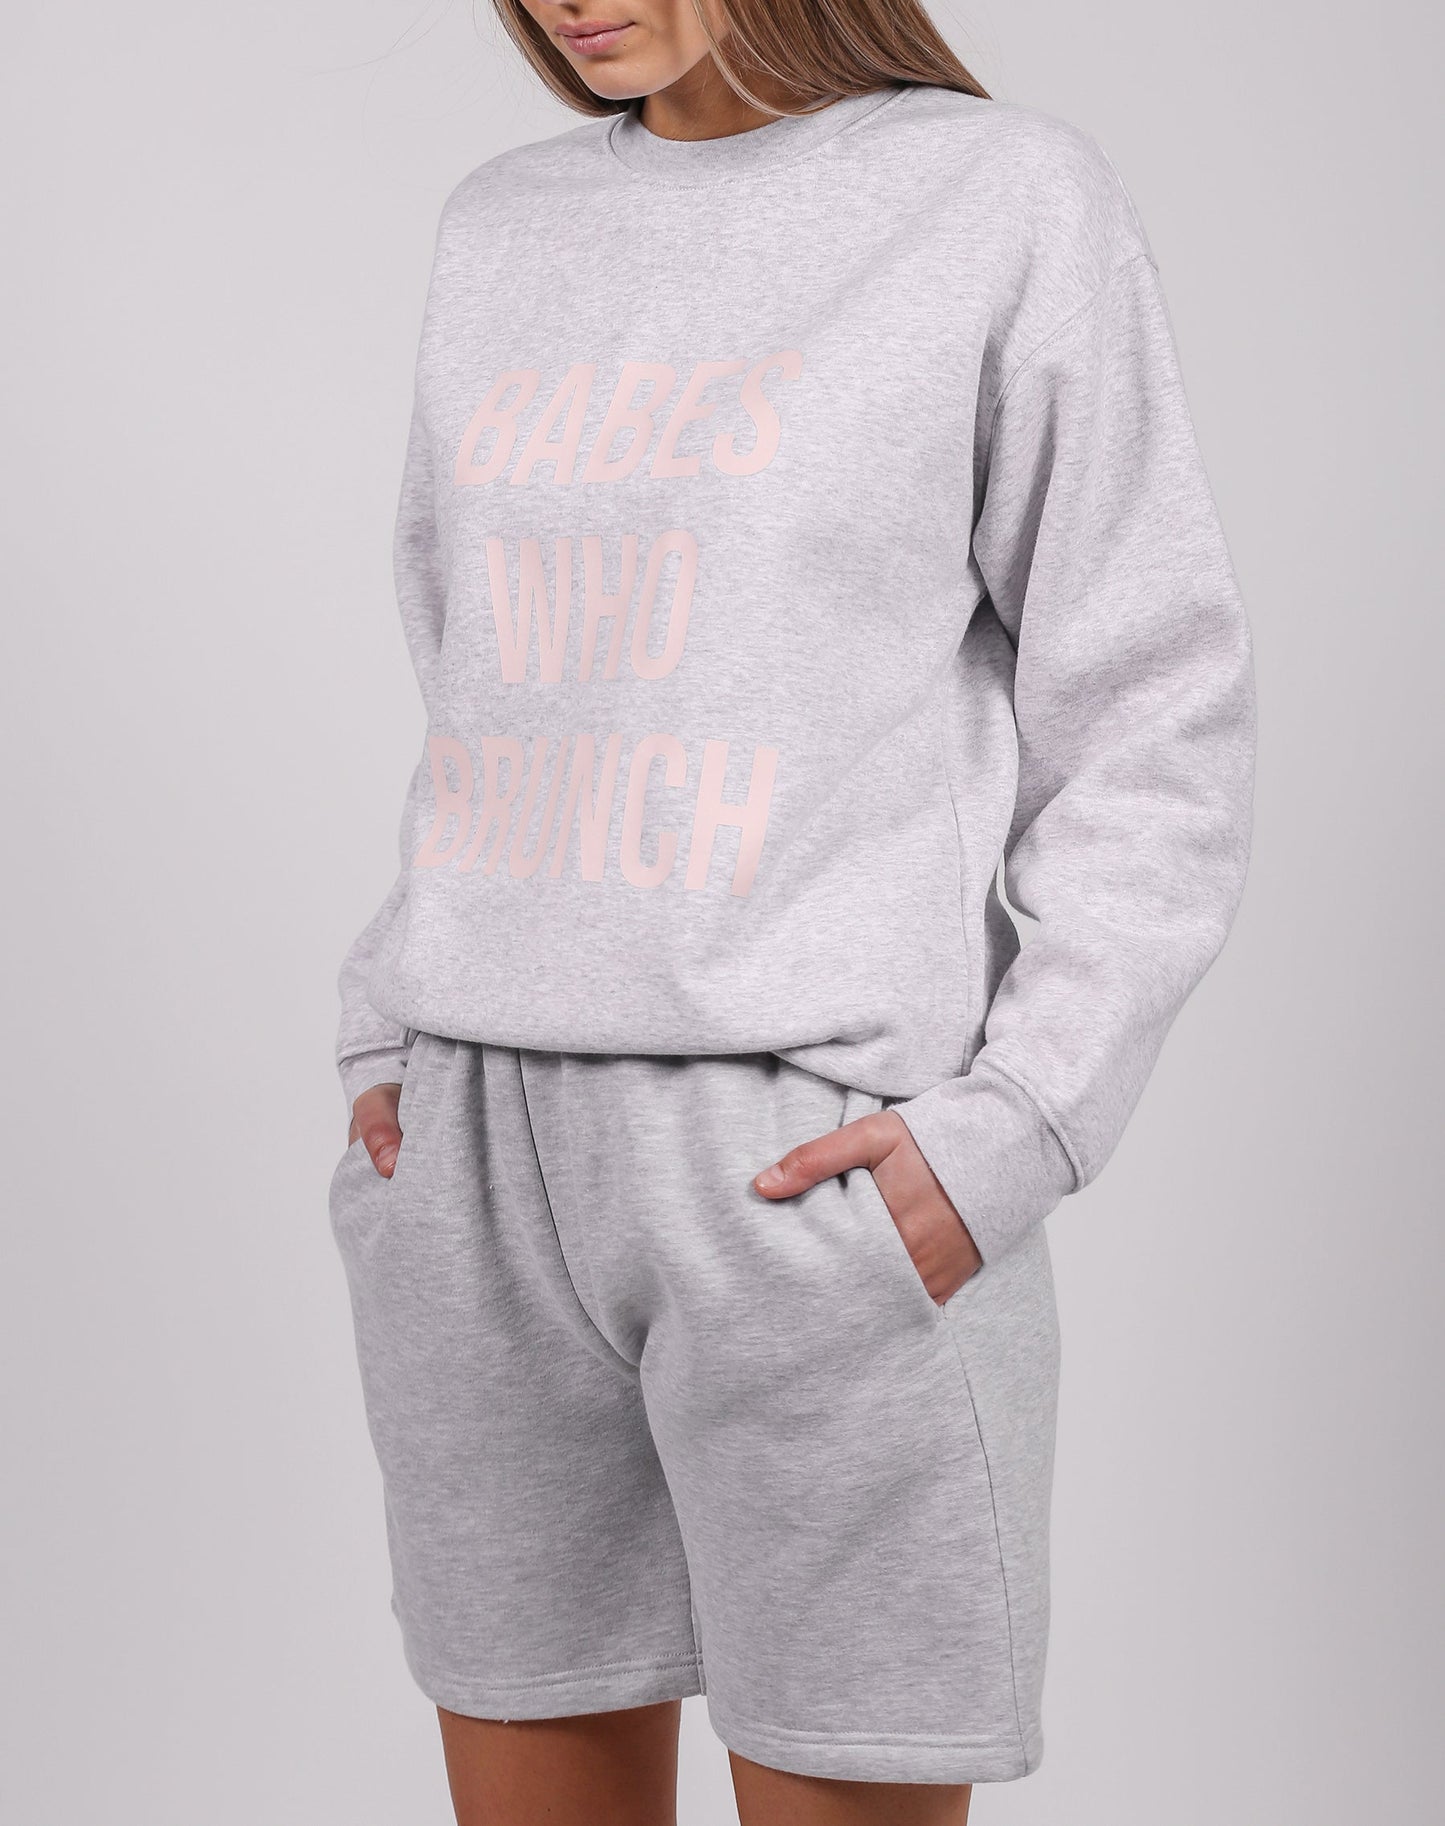 Babes Who Brunch Core Crew In Pebble Grey